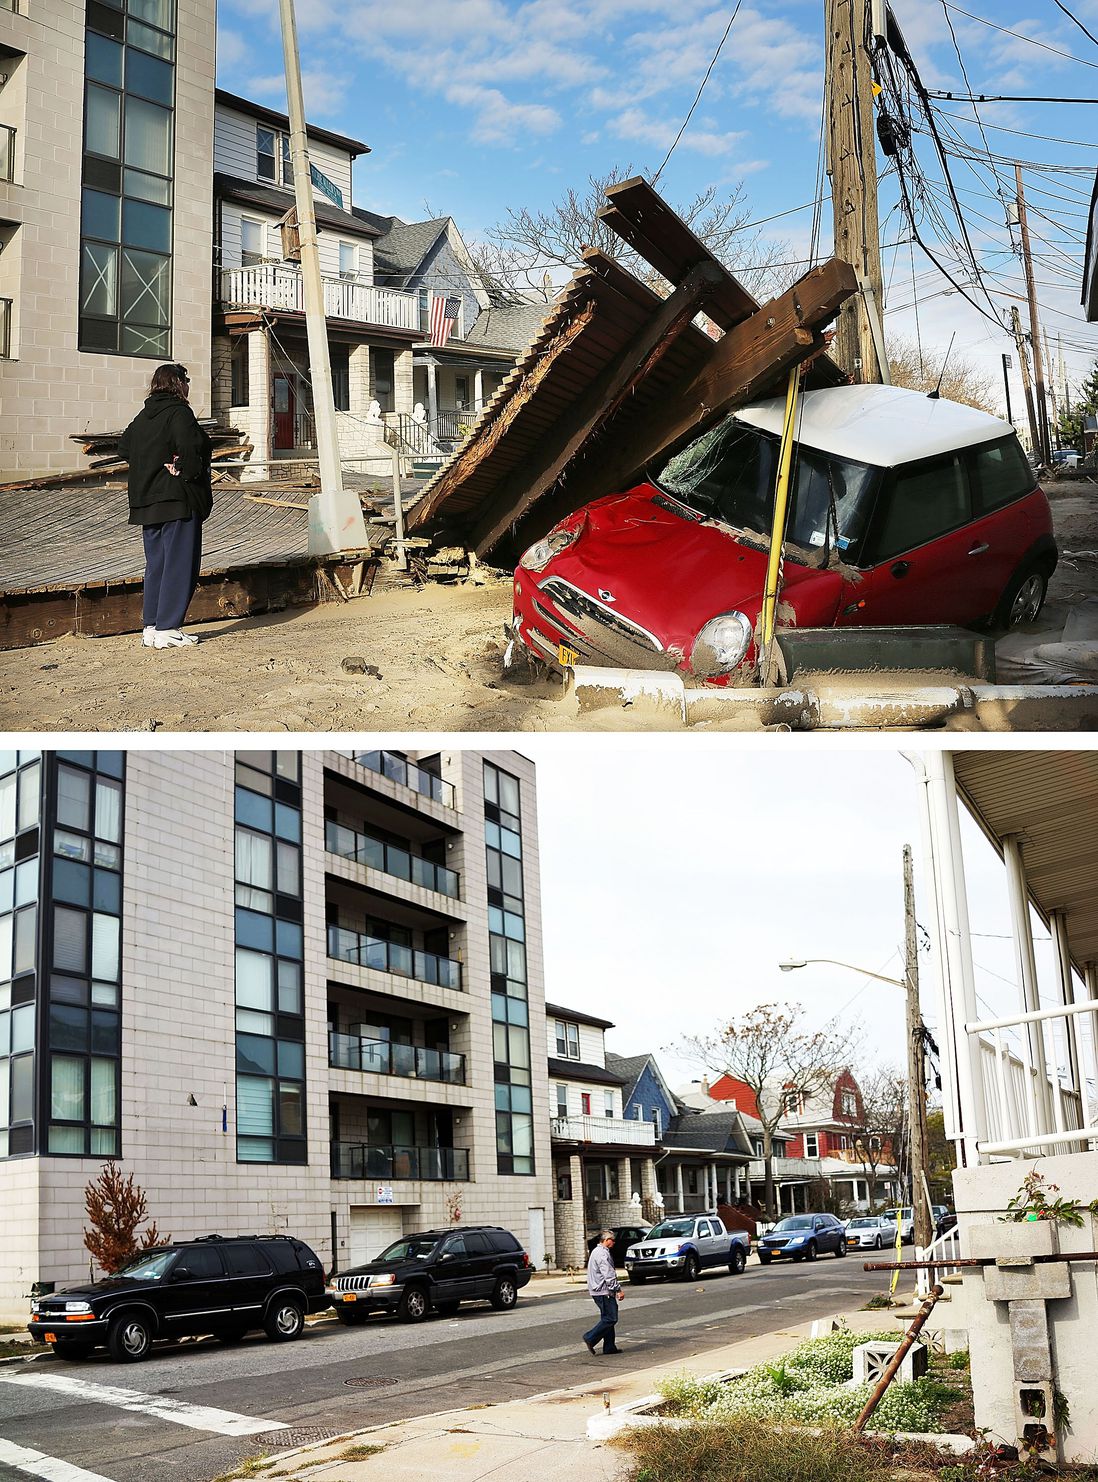 [Top] A woman looks at a damaged car, after Hurricane Sandy October 31, 2012 in the Queens borough of the Queens borough of New York City. [Bottom] A man walk down a street on October 20, 2013.